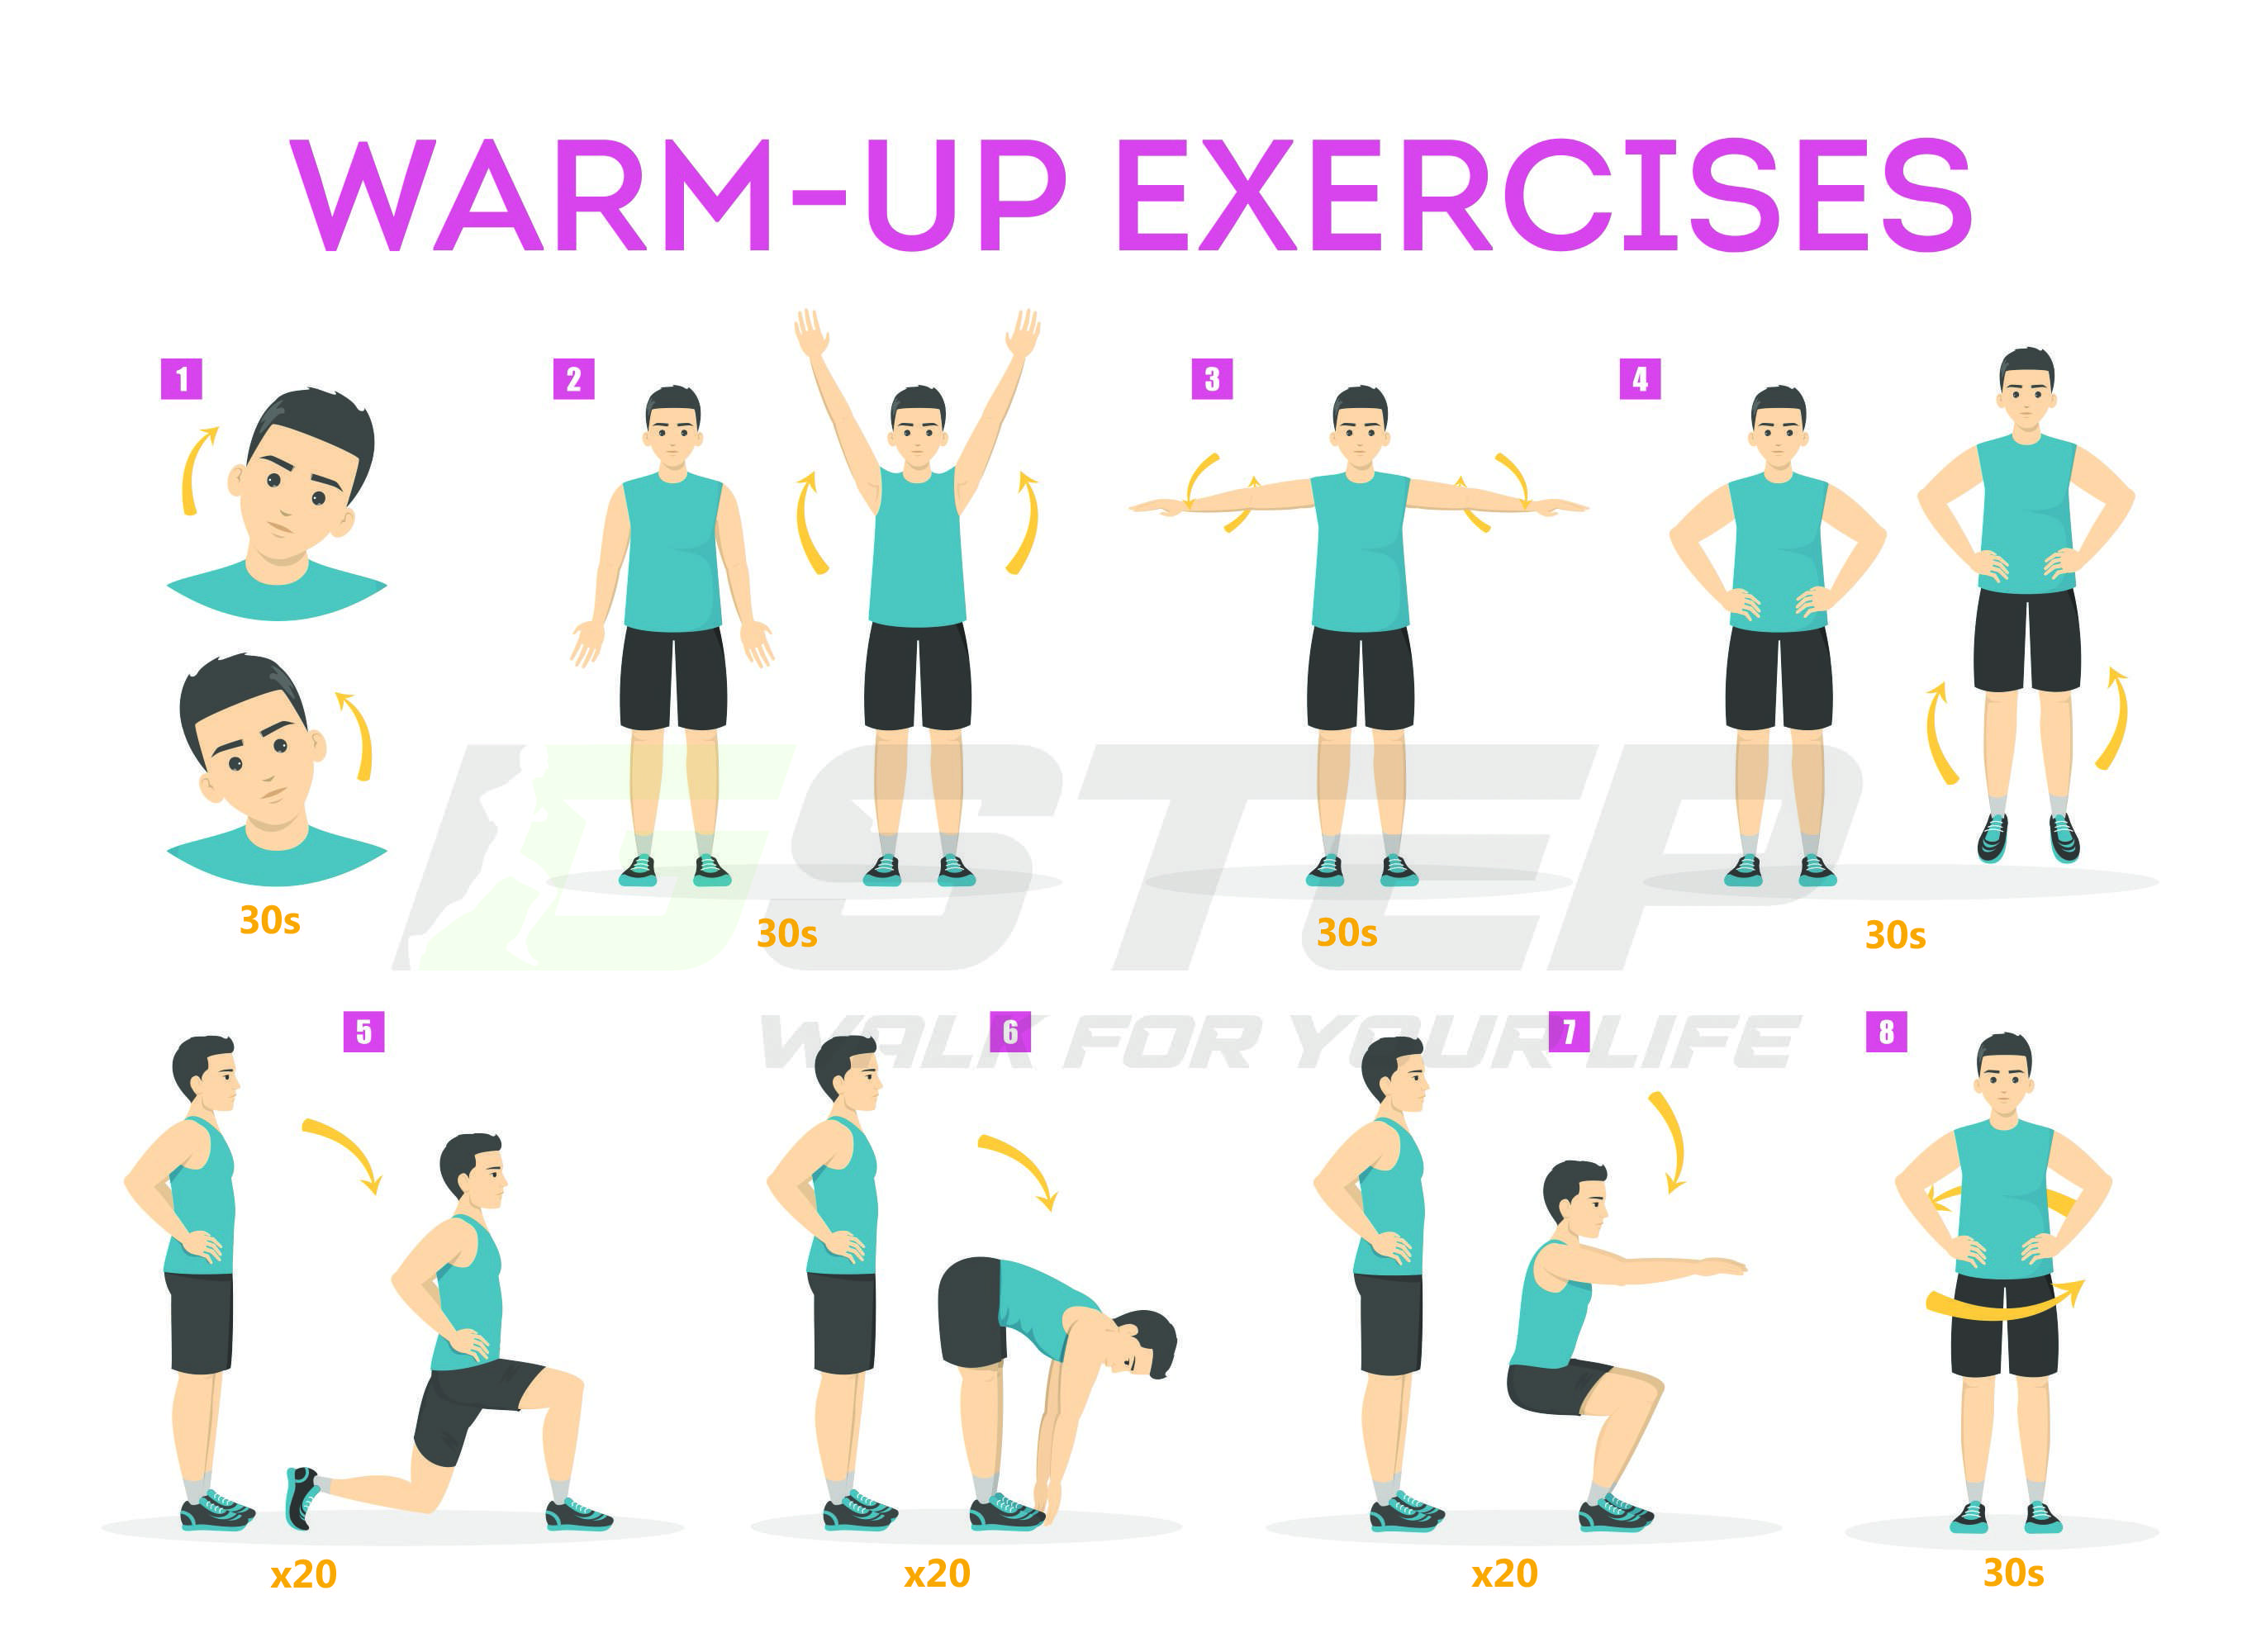 5-min warm-up exercise before running